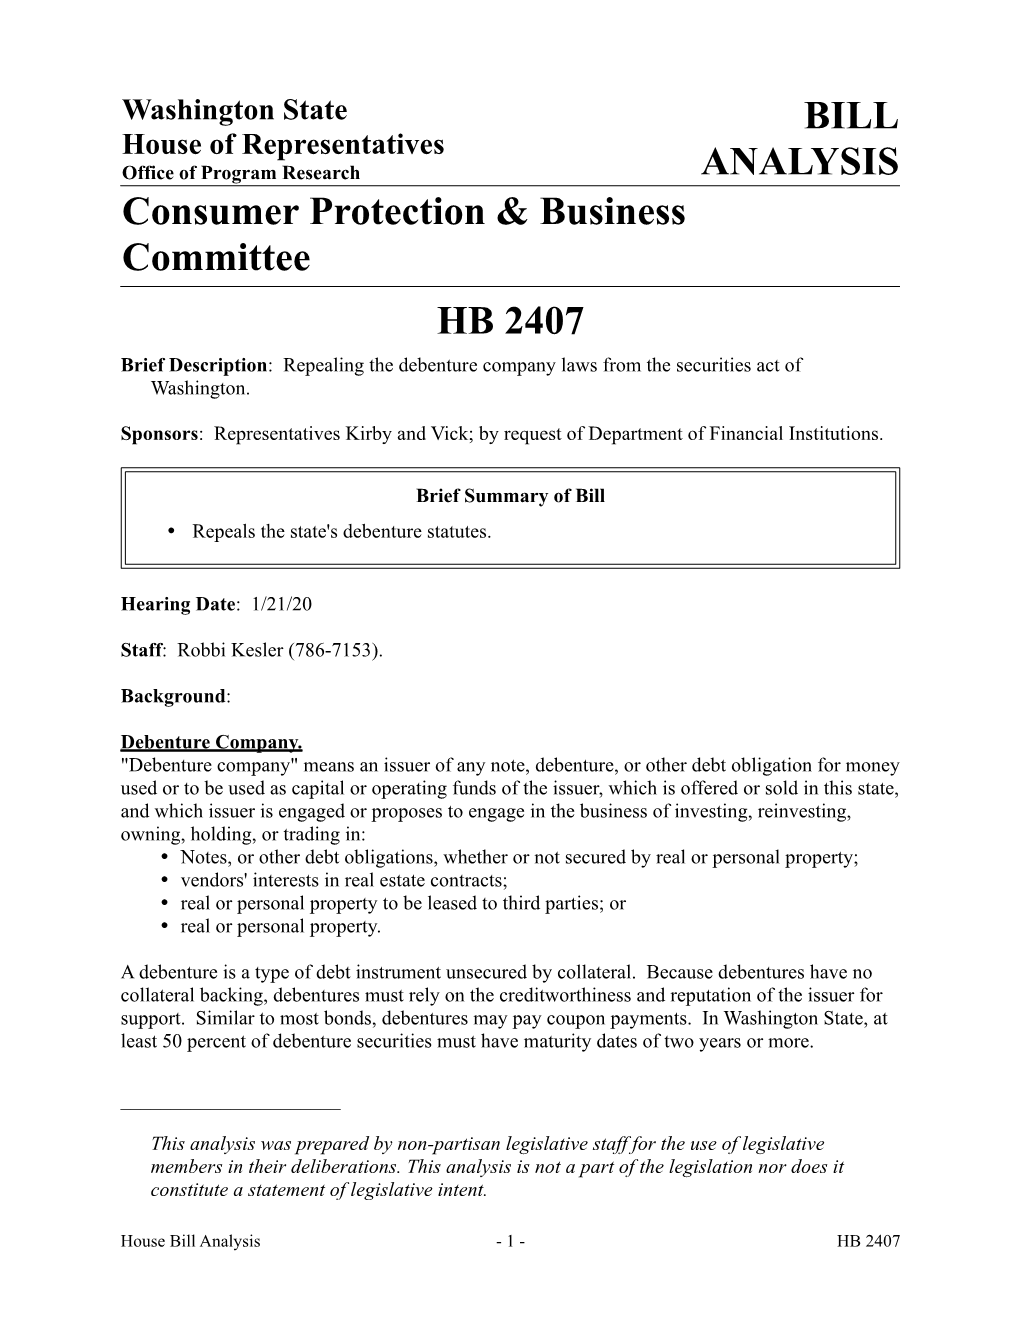 BILL ANALYSIS Consumer Protection & Business Committee HB 2407